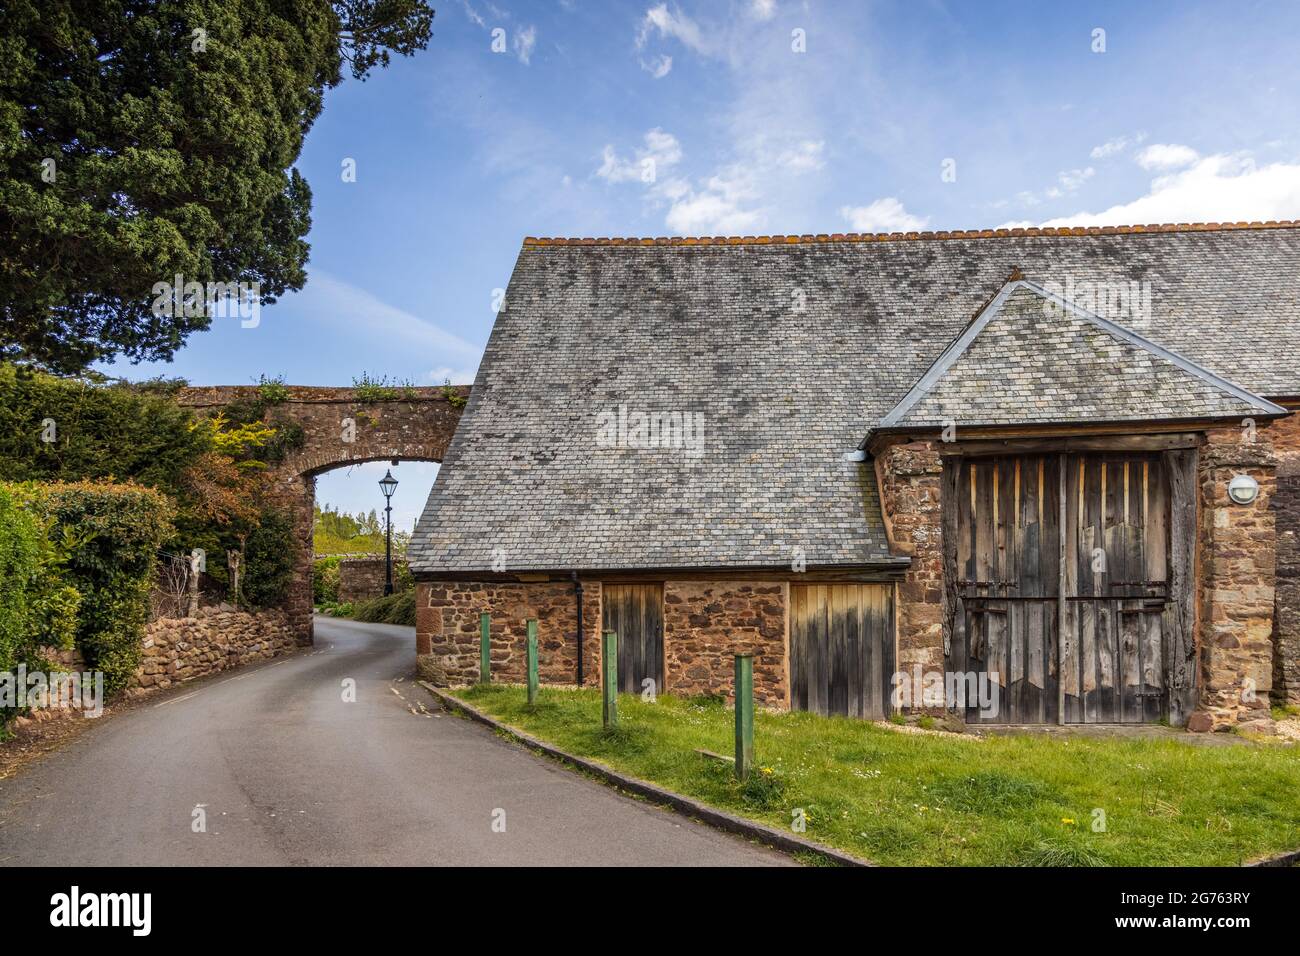 The 14th Century Grade II listed Tithe Barn at Dunster, Somerset, England. Stock Photo